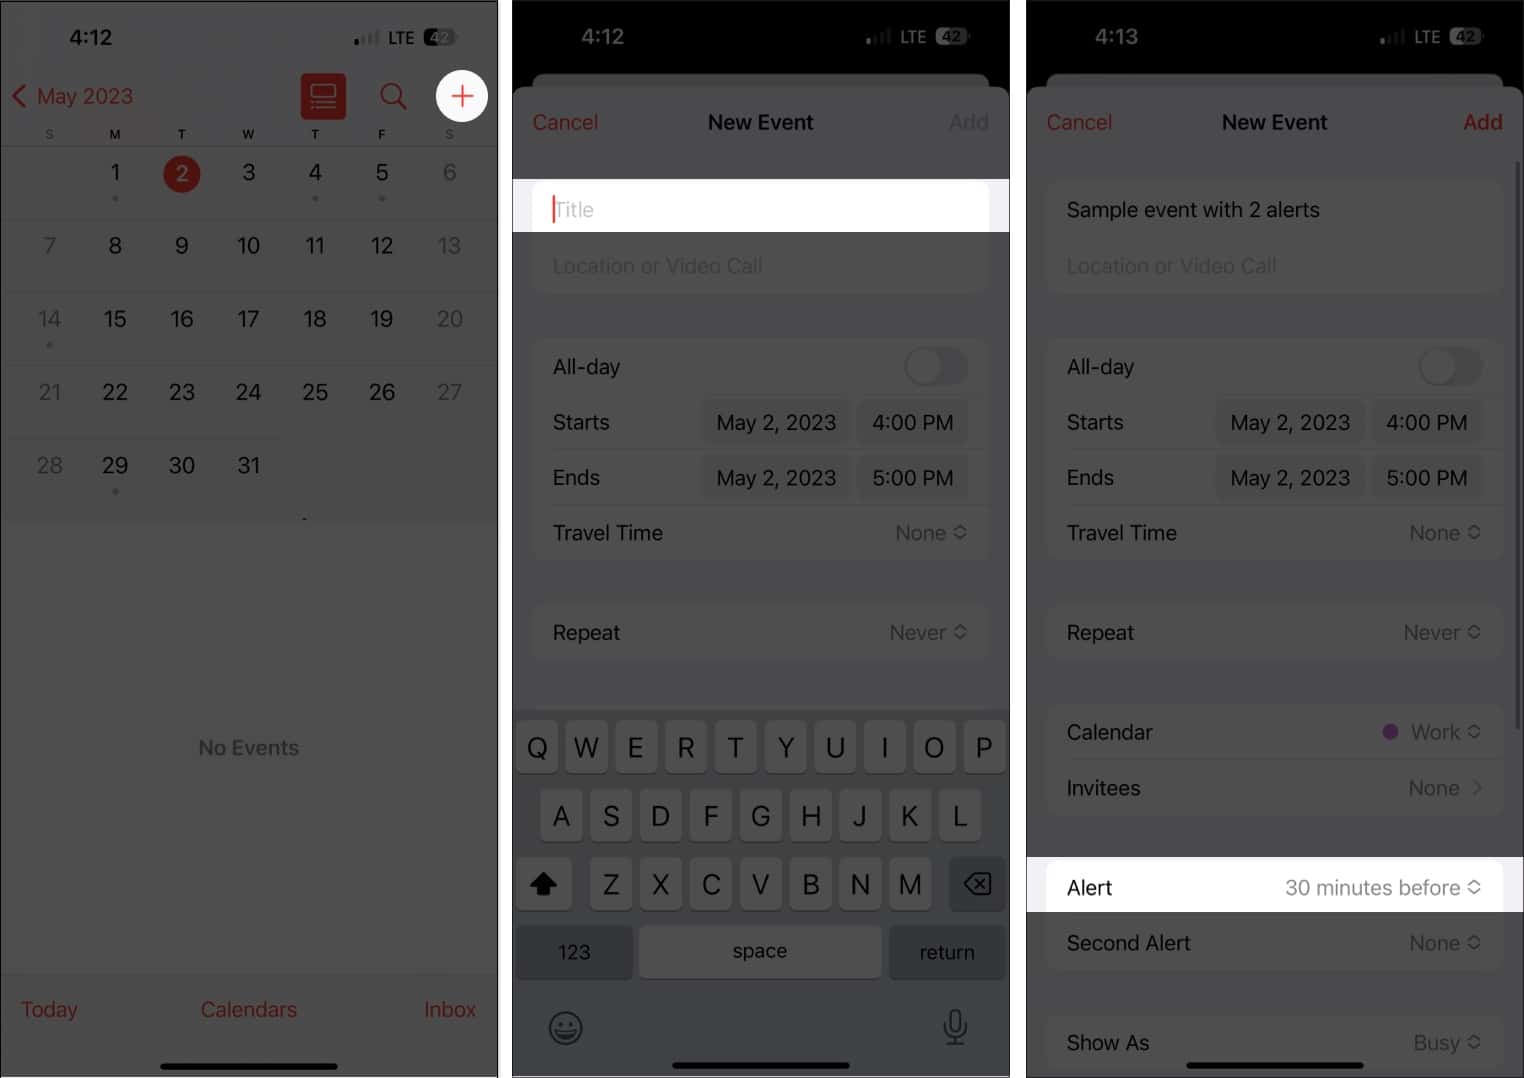 Tap + icon, enter the title, navigate to alert option in calendars app